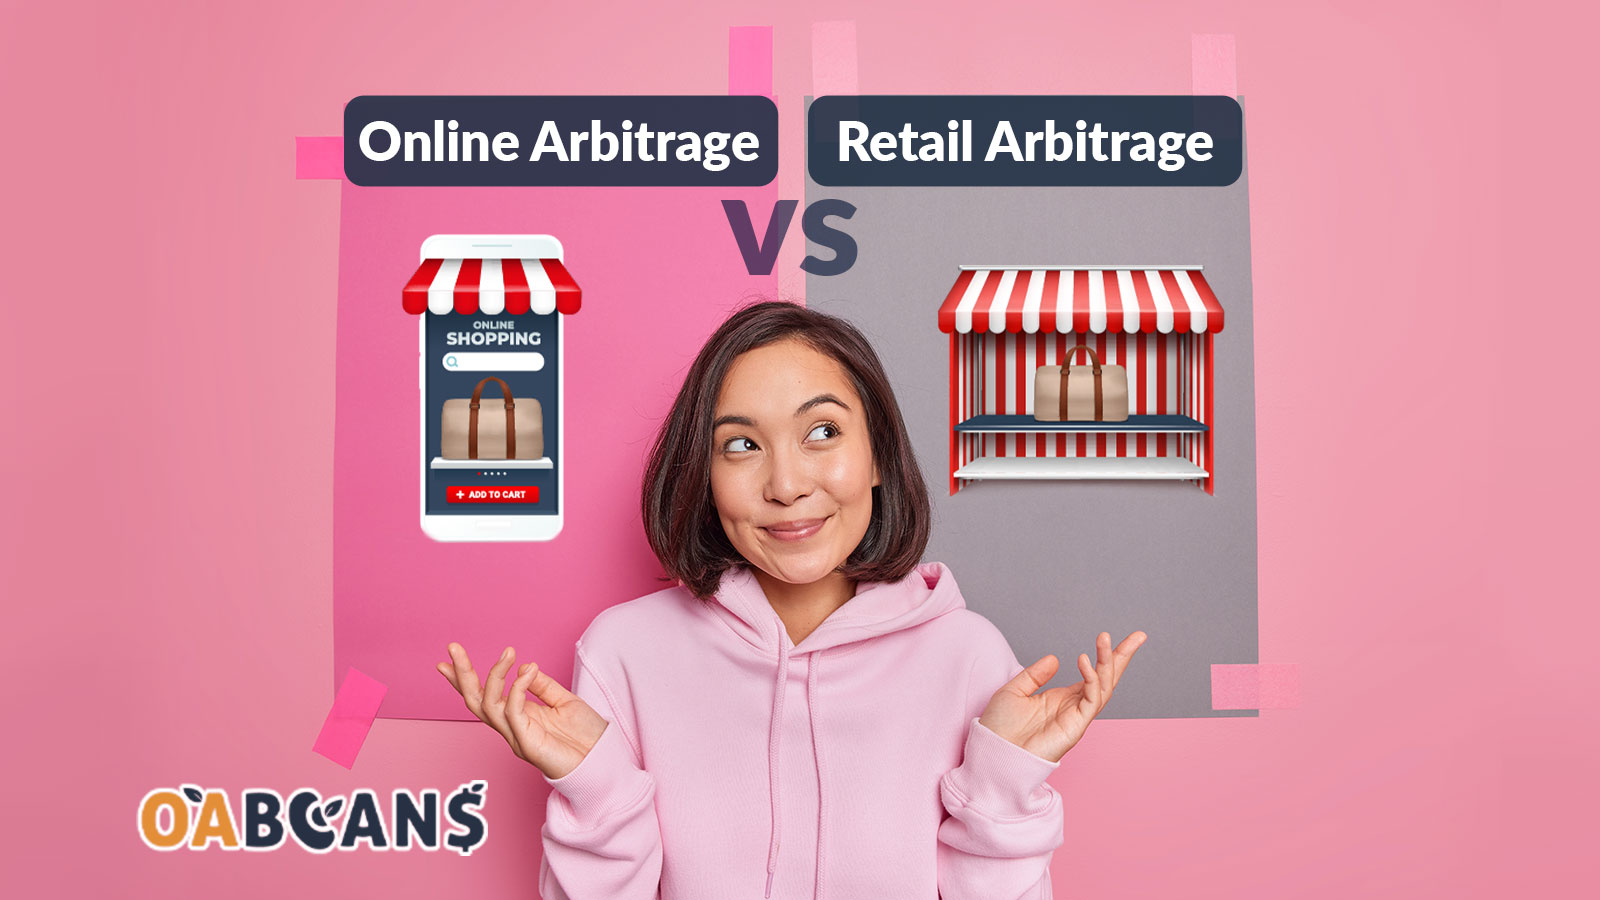 There are some key differences between online and retail arbitrage.